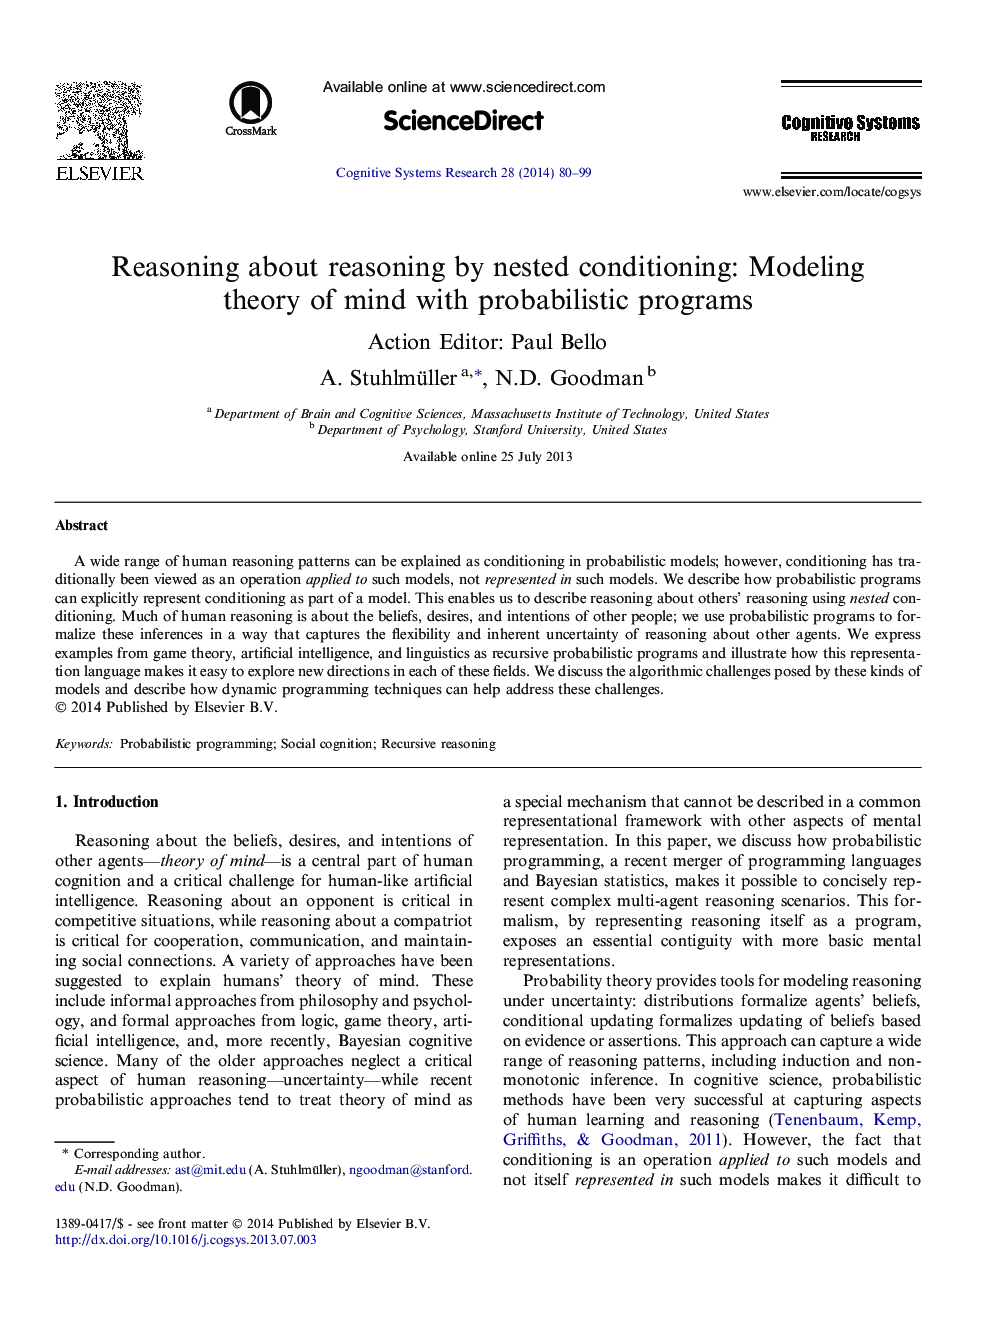 Reasoning about reasoning by nested conditioning: Modeling theory of mind with probabilistic programs